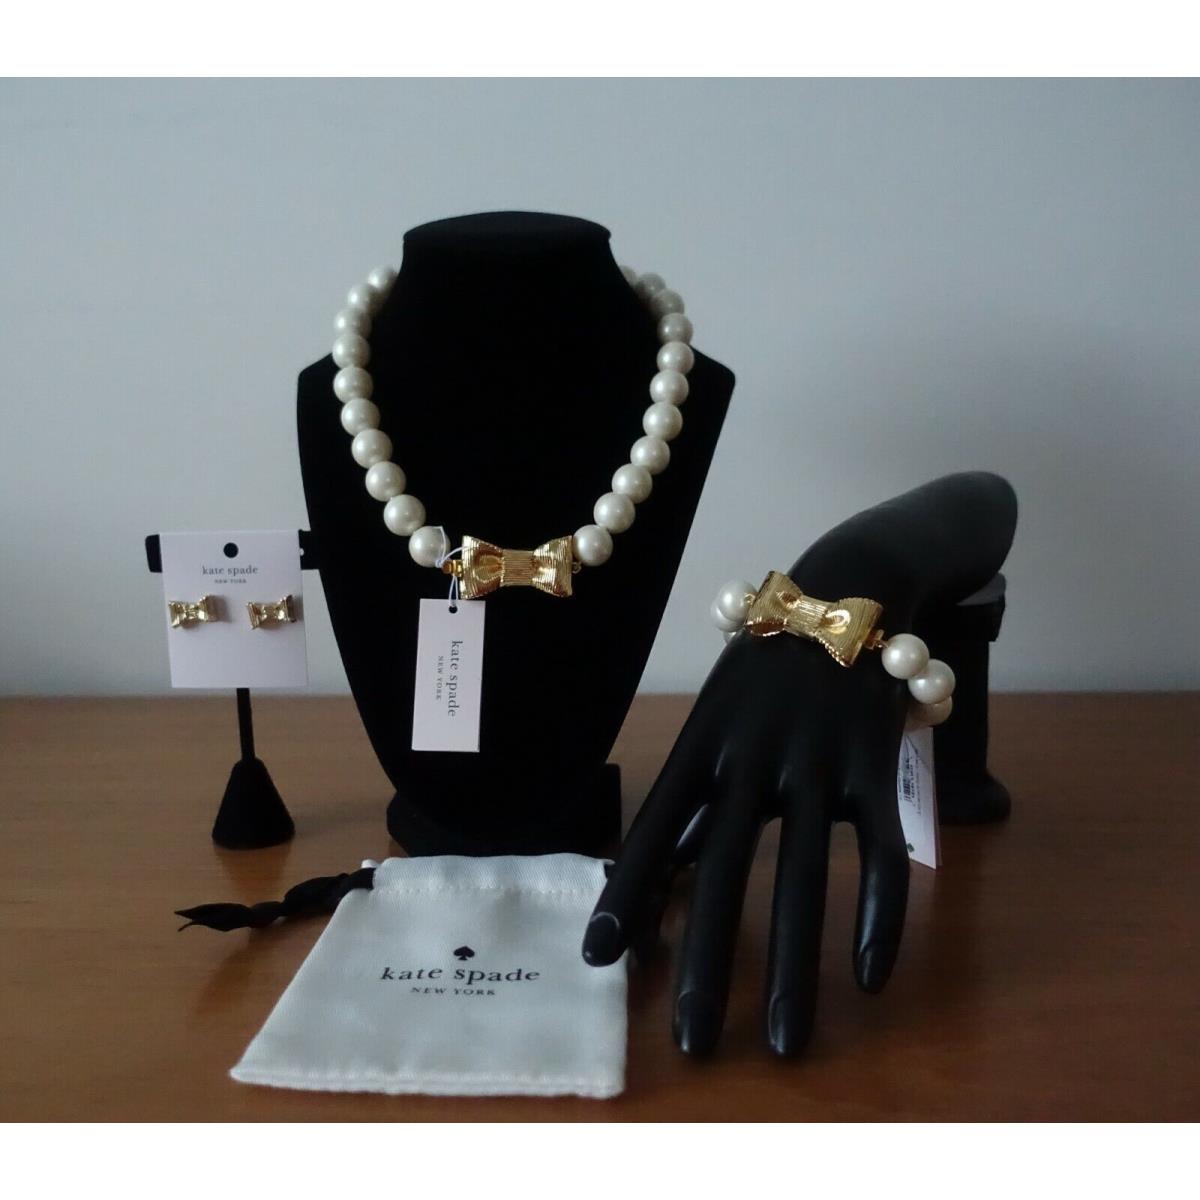 Kate Spade York All Wrapped UP IN Pearls Studs Bracelet and Short Necklace  - Kate Spade jewelry - 081433842559 | Fash Brands